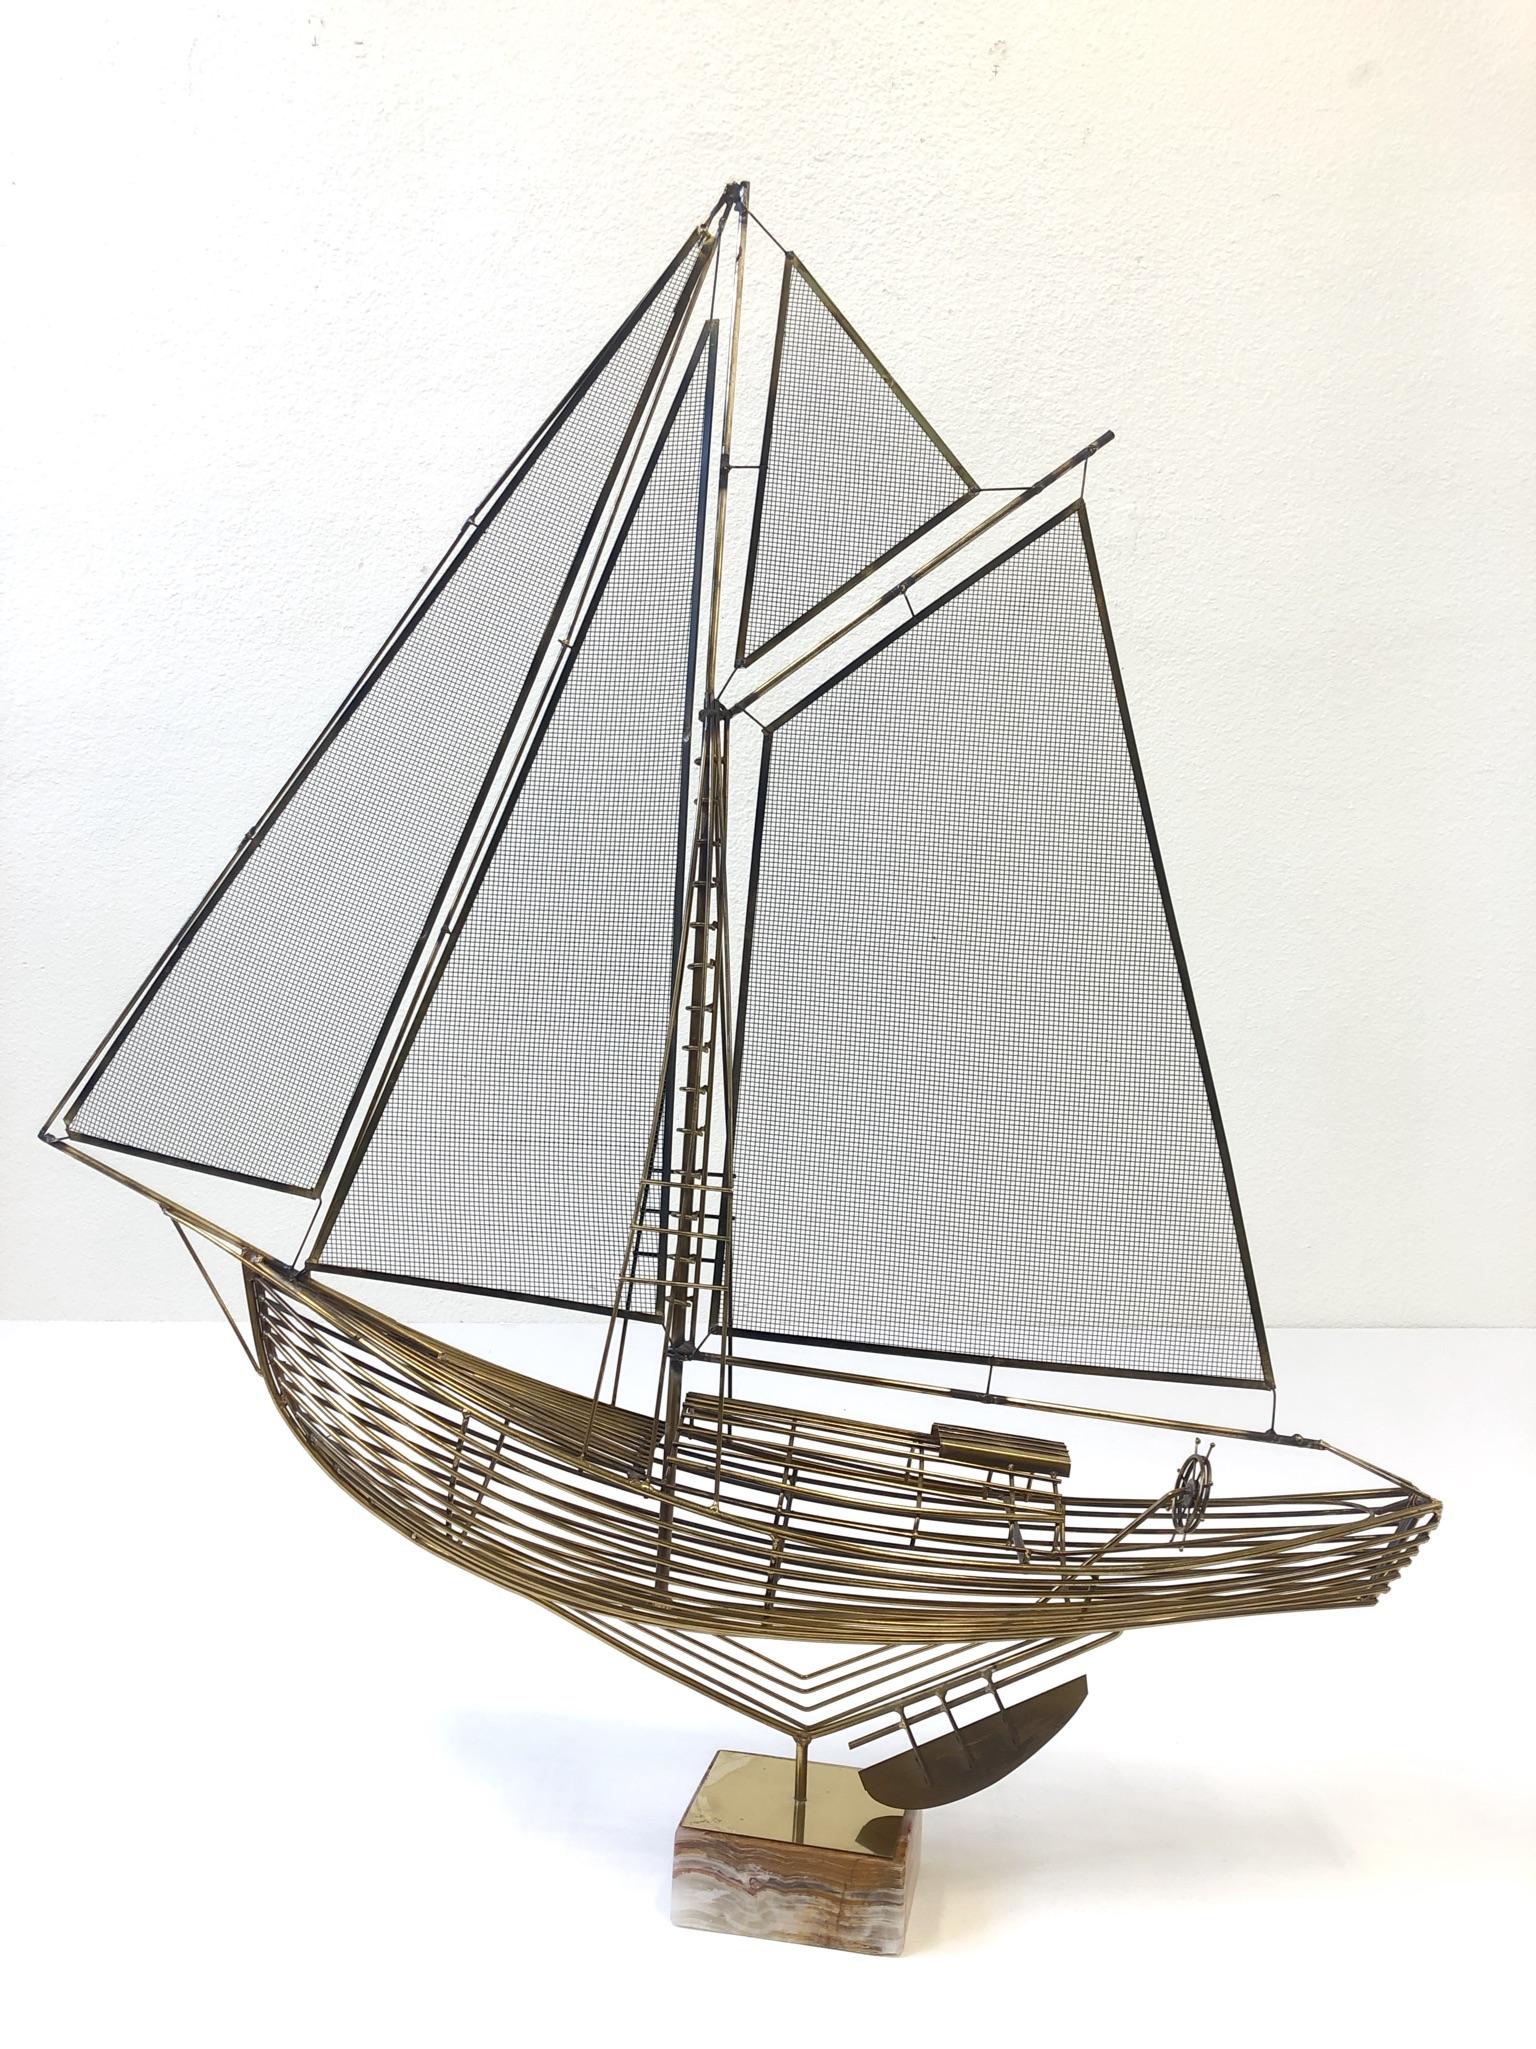 A beautiful brass sailboat sculpture designed by Curtis Jere in the 1970s. The sculpture sits in a salad onyx base.
Dimension: 40” wide, 47” high, 9” deep.